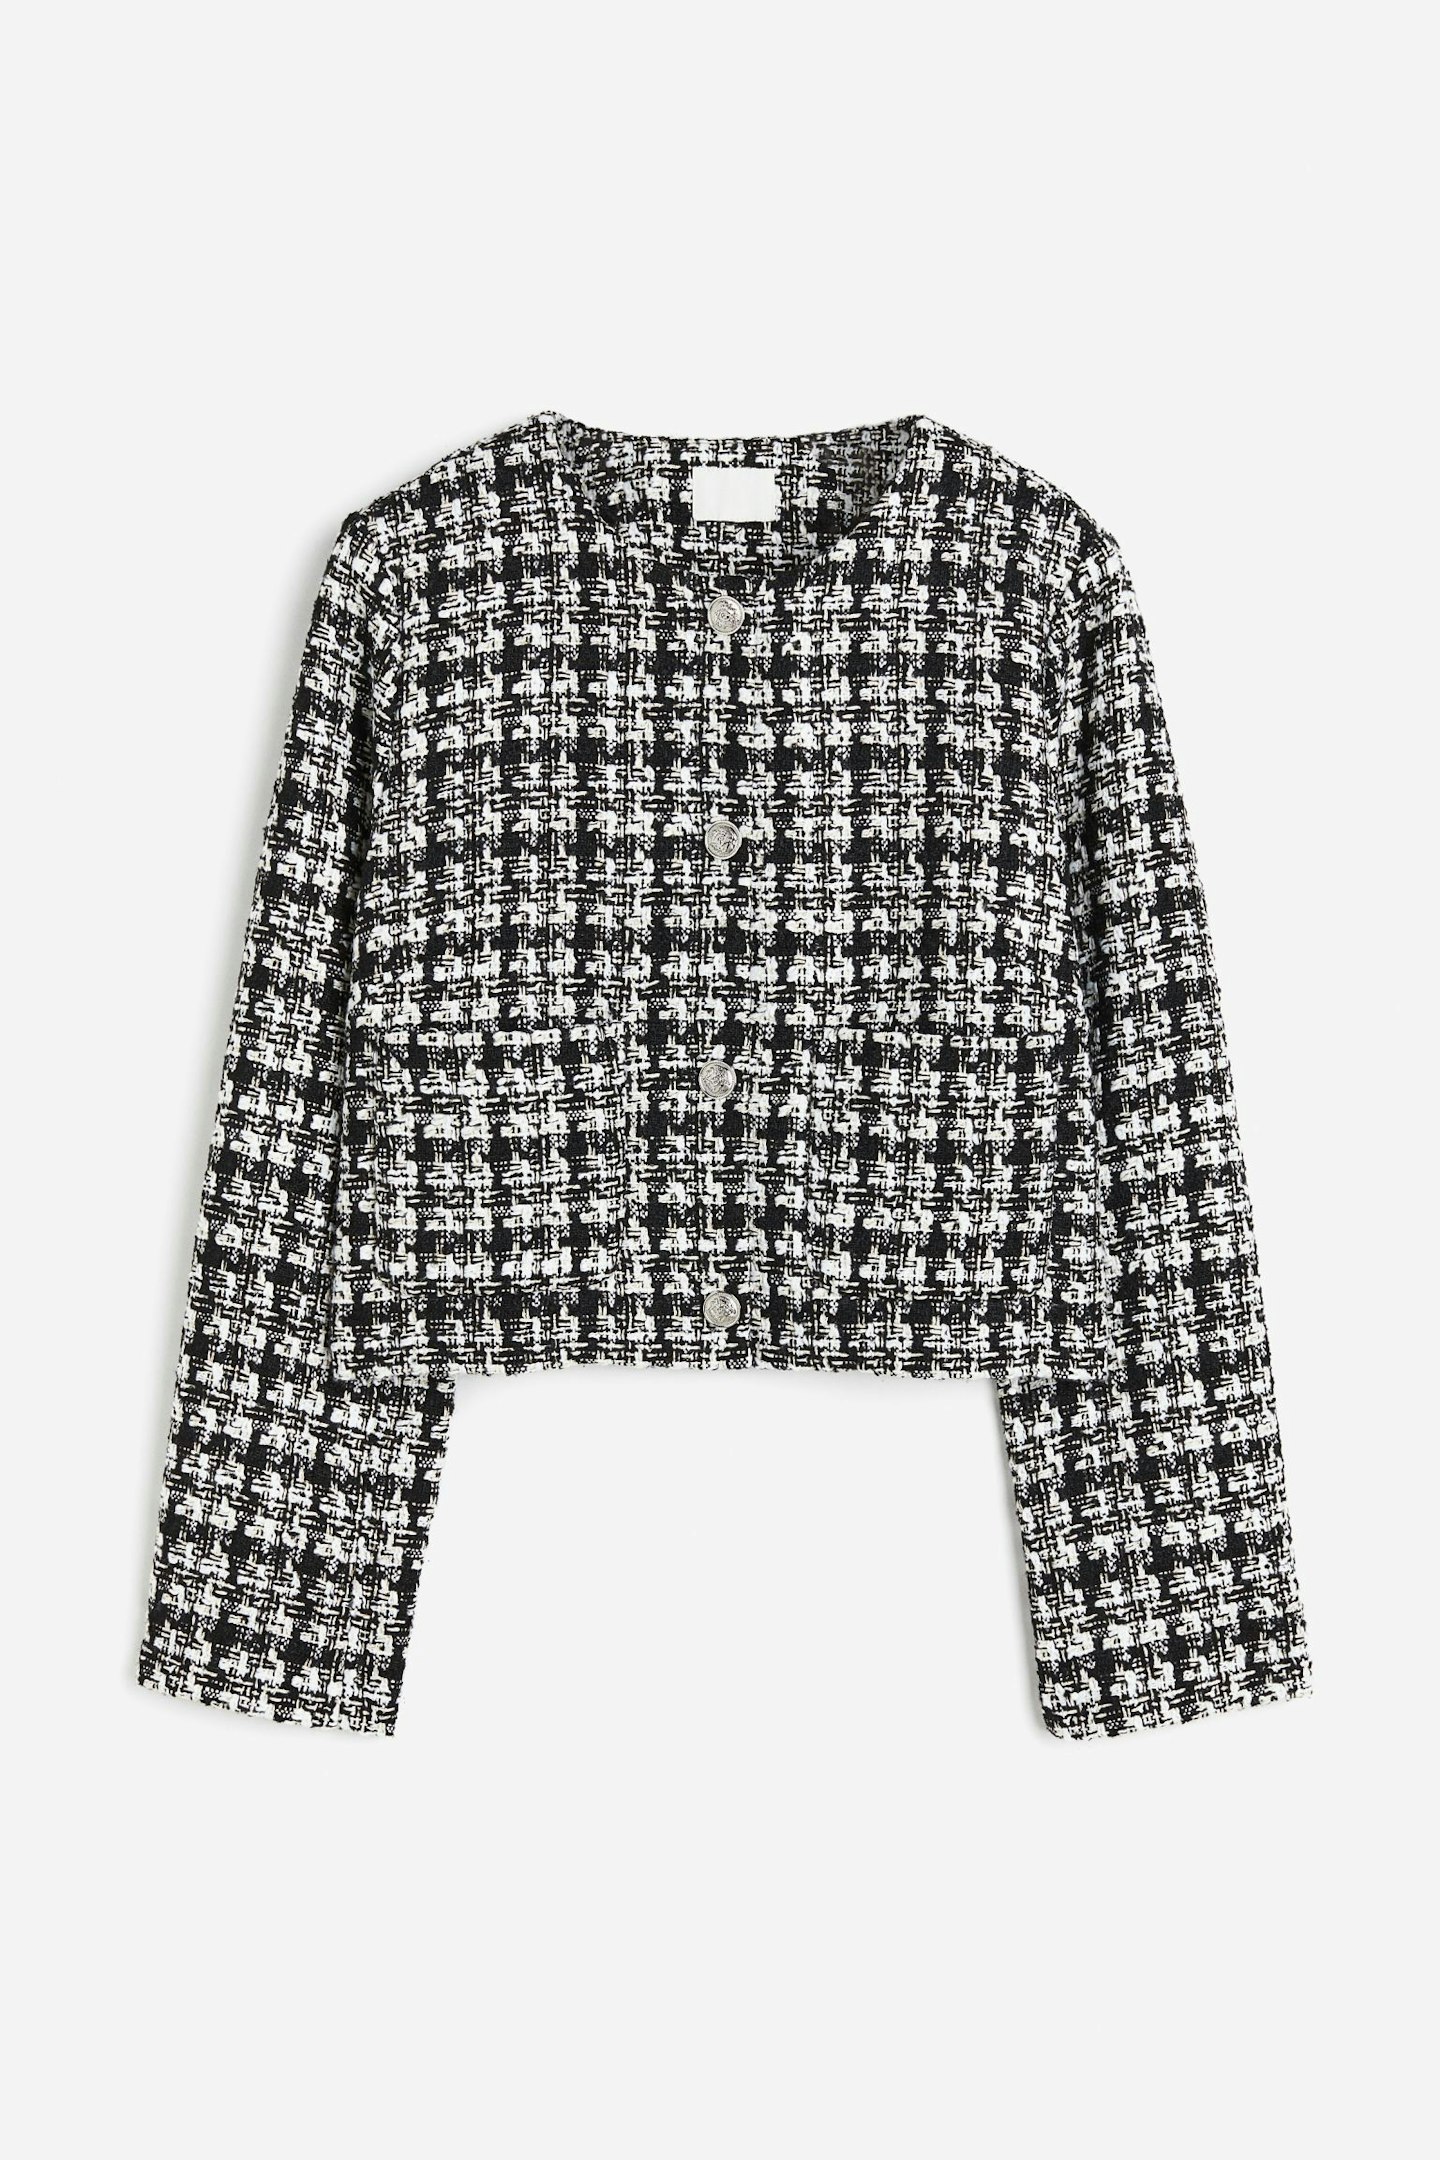 autumn outfits H&M, Black And White Boucle Jacket